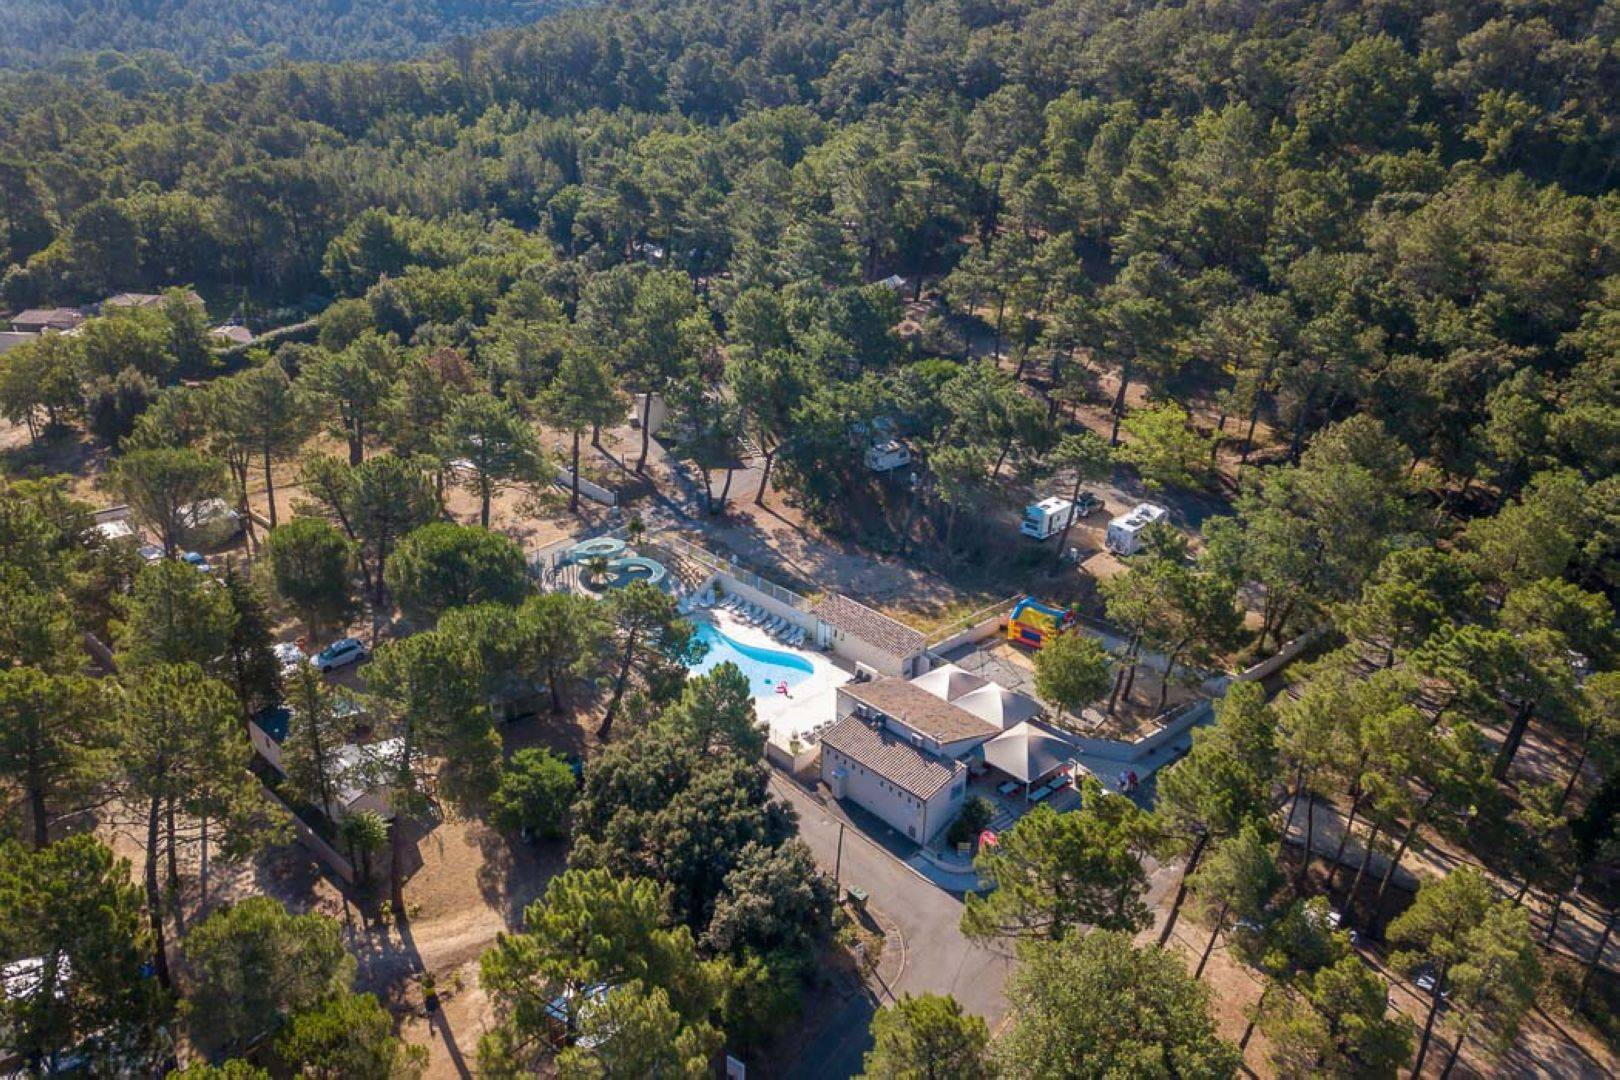 (c) Camping-pinede-provence.com